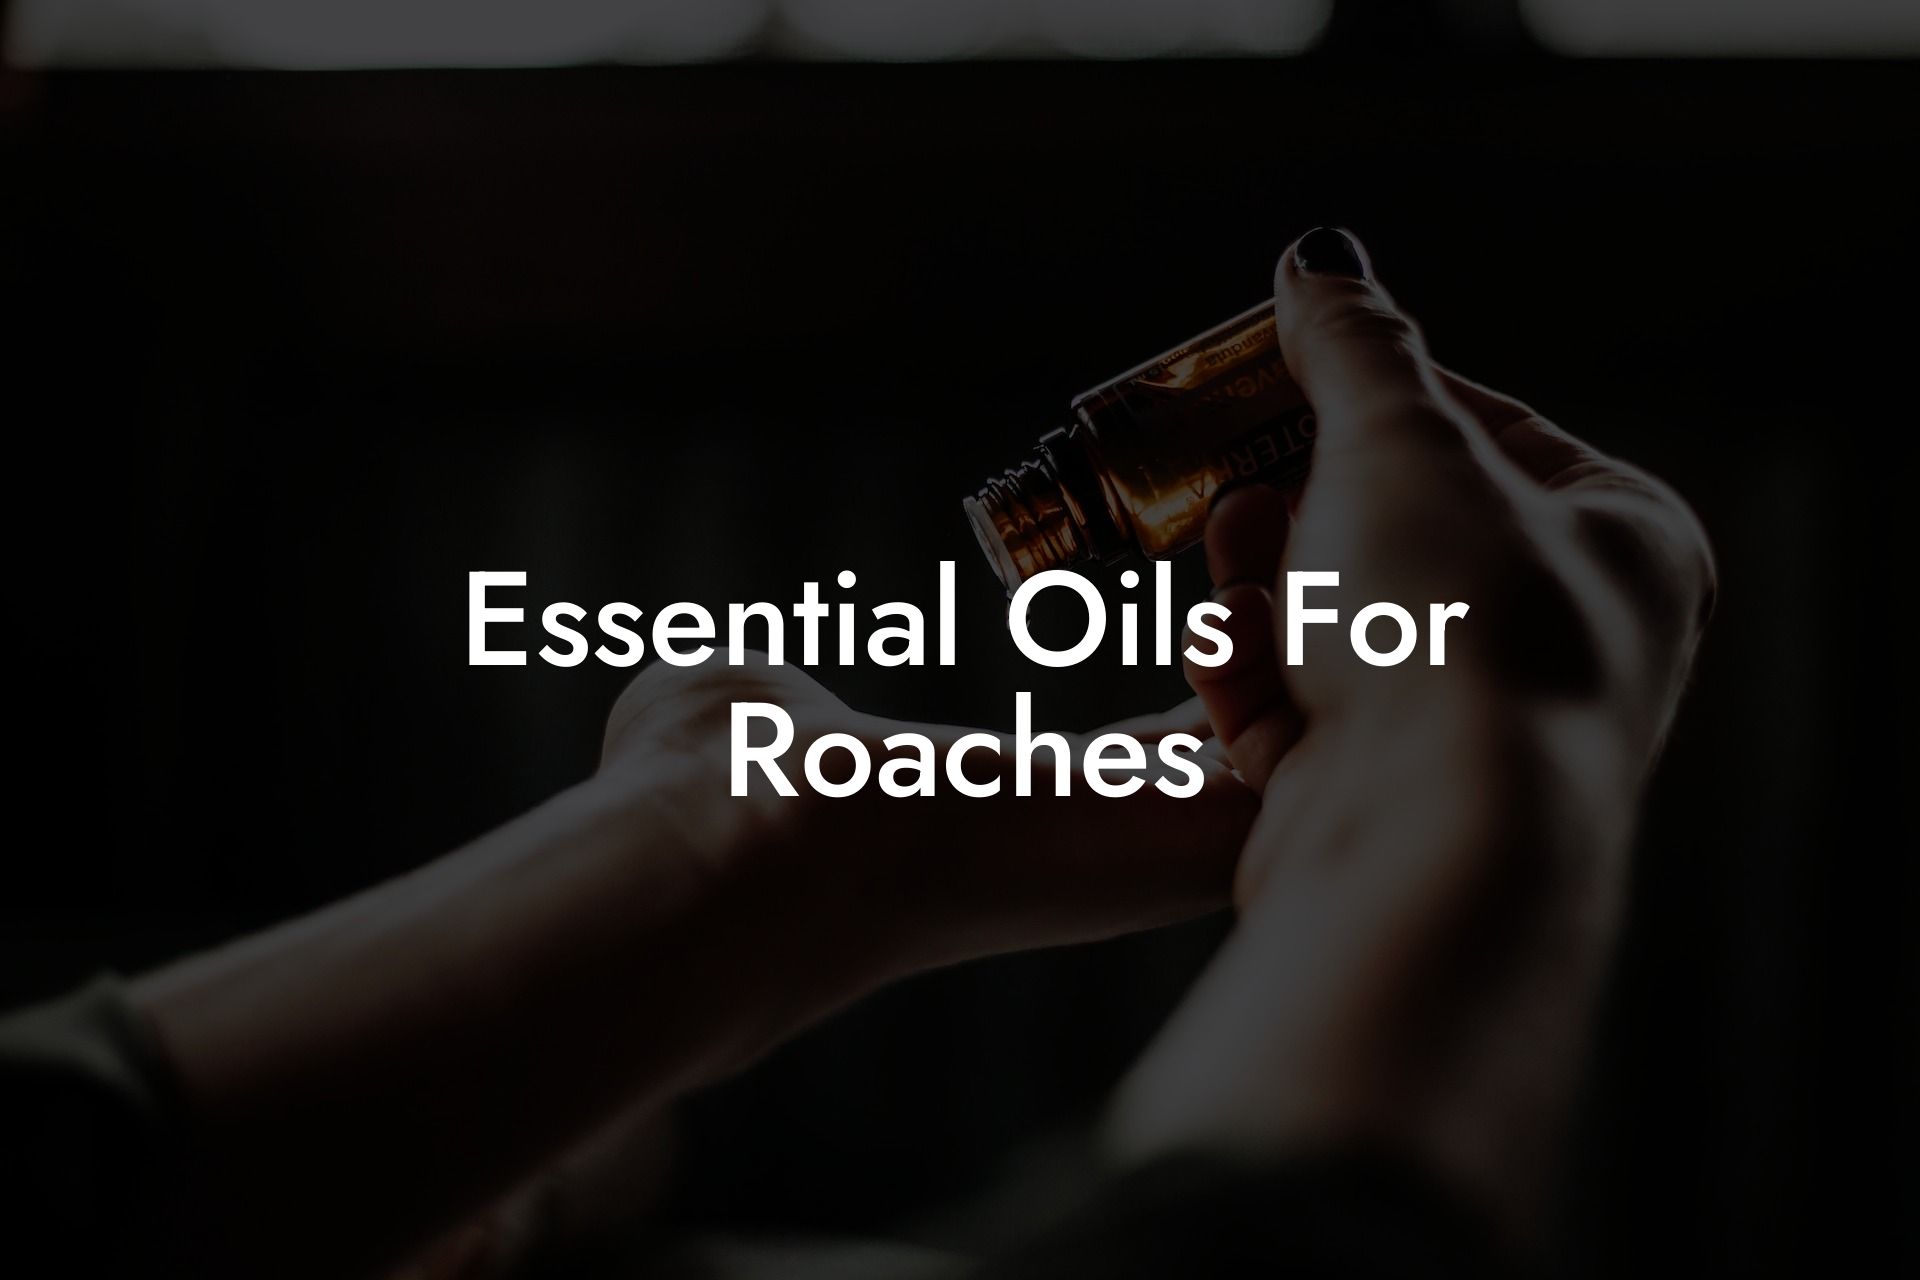 Essential Oils For Roaches